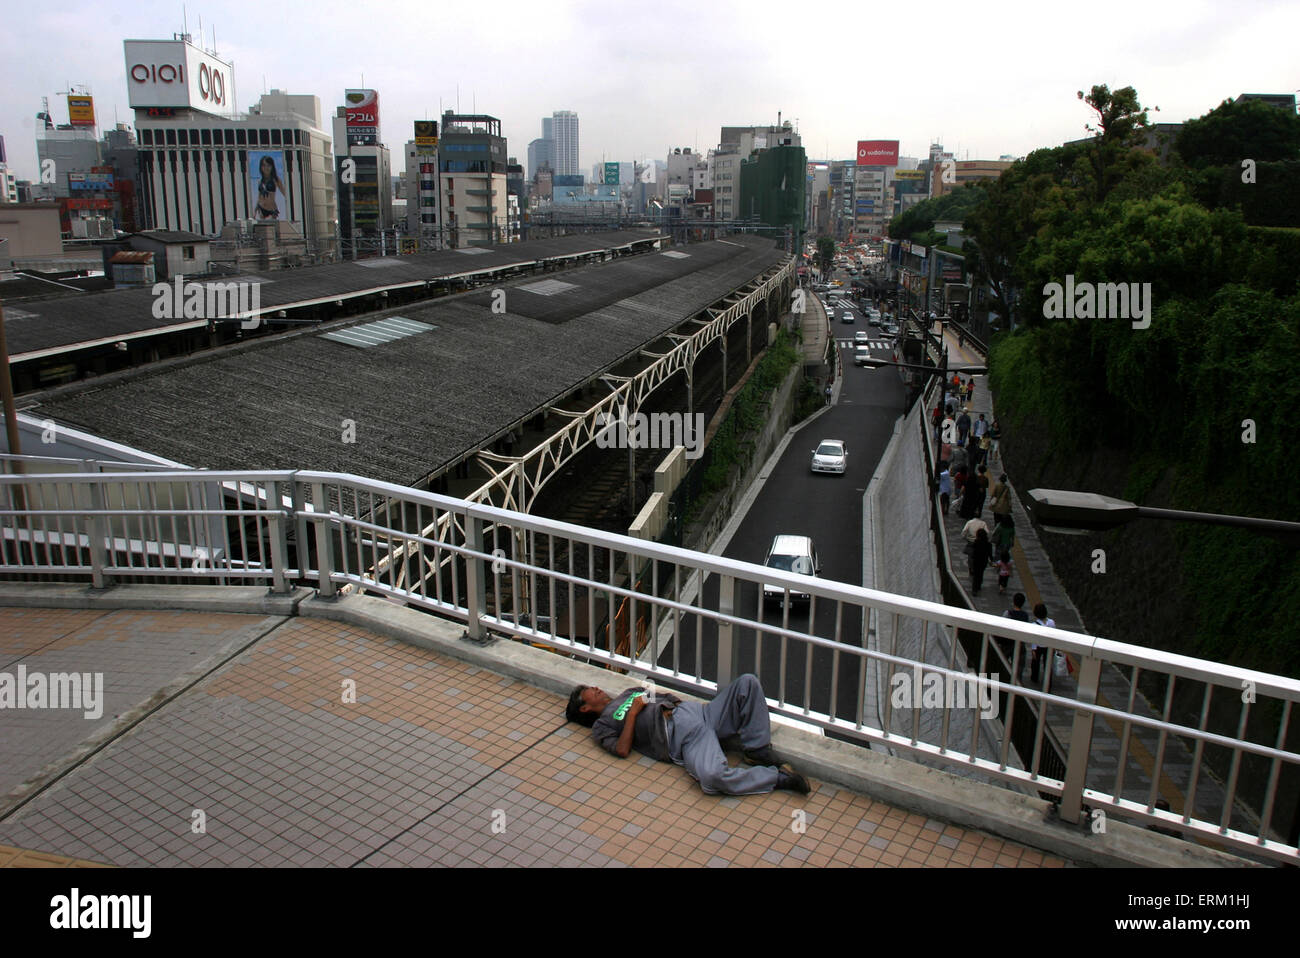 A homeless man sleeps on a sidewalk with the back drop of Tokyo buildings, Japan. Stock Photo